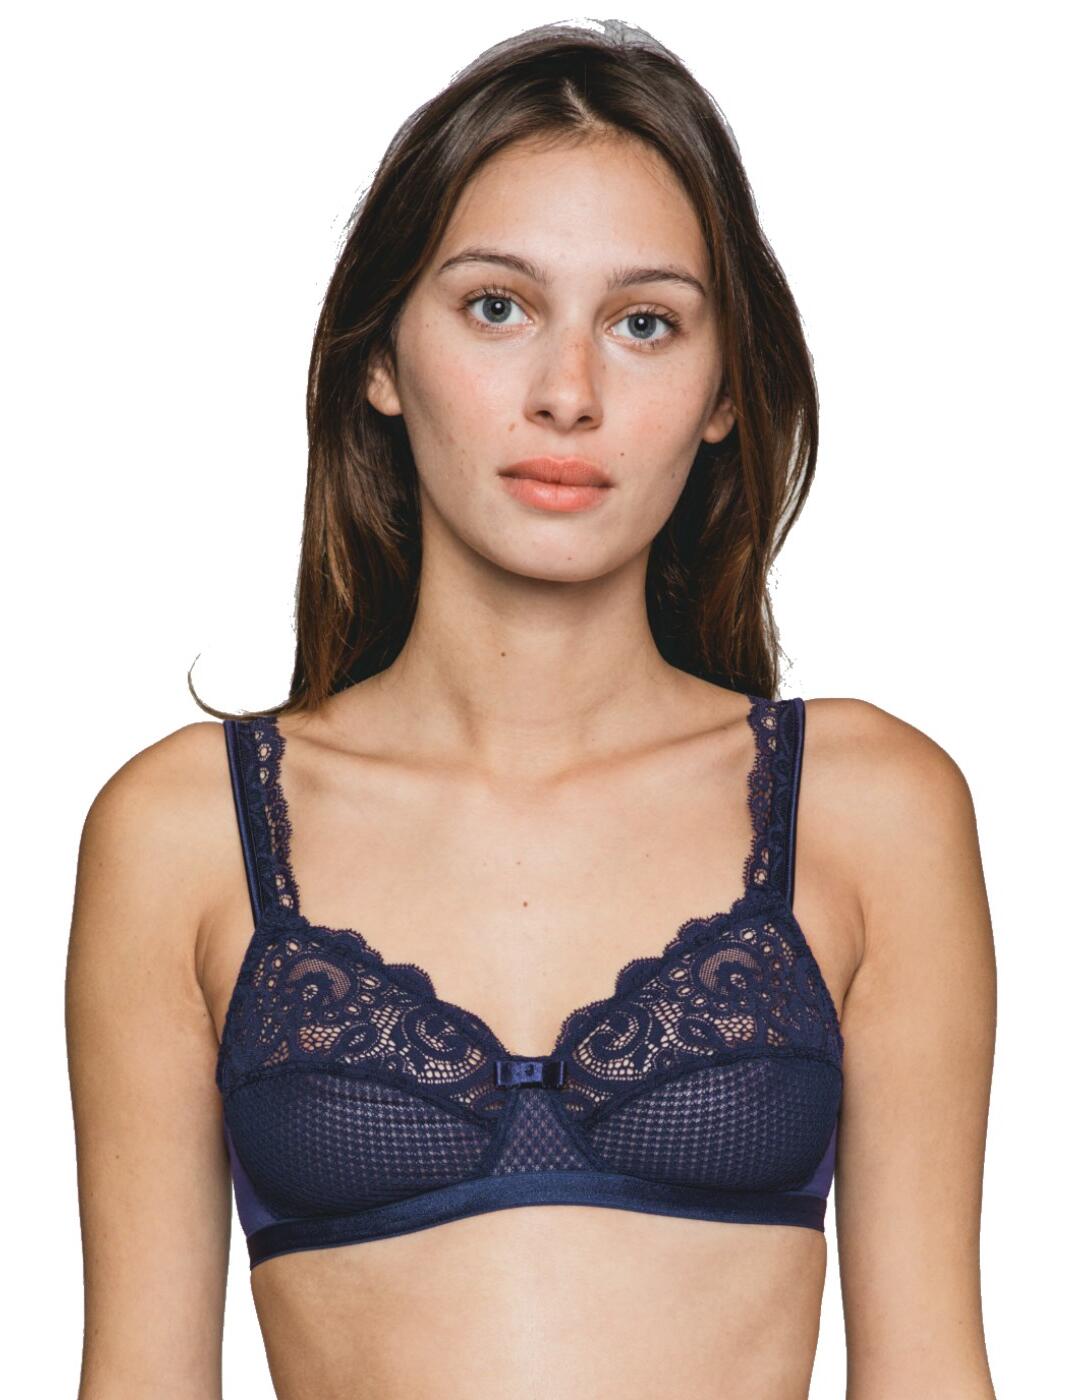 13843 Maison Lejaby Gaby Non-Wired Soft Cup Bra - 13843 Nuit Noire